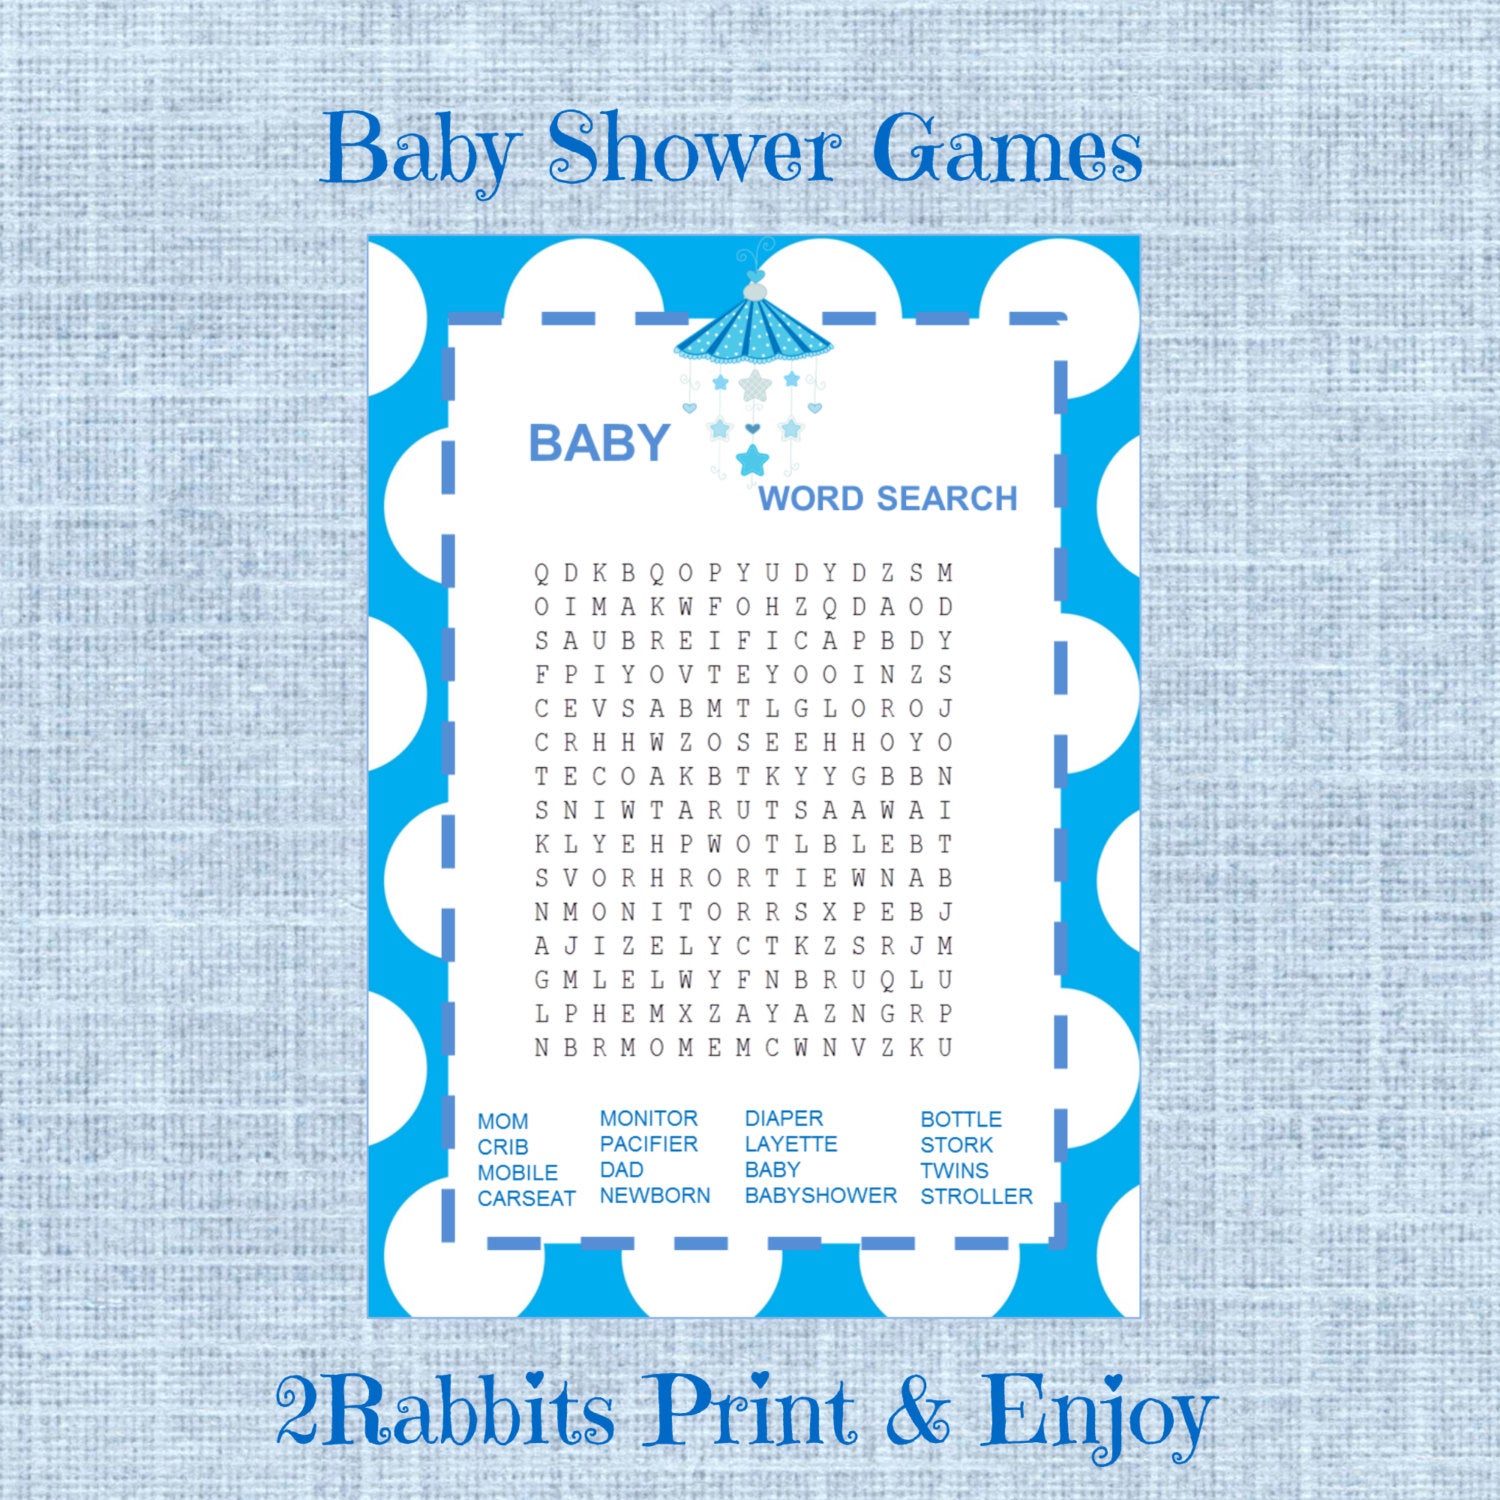 Groupon Salon De Jardin Luxe Baby Shower Word Search Game Boy Baby Shower Crossword Puzzle Game Instant Download Blue Polka Dot Background Blue Baby Mobile